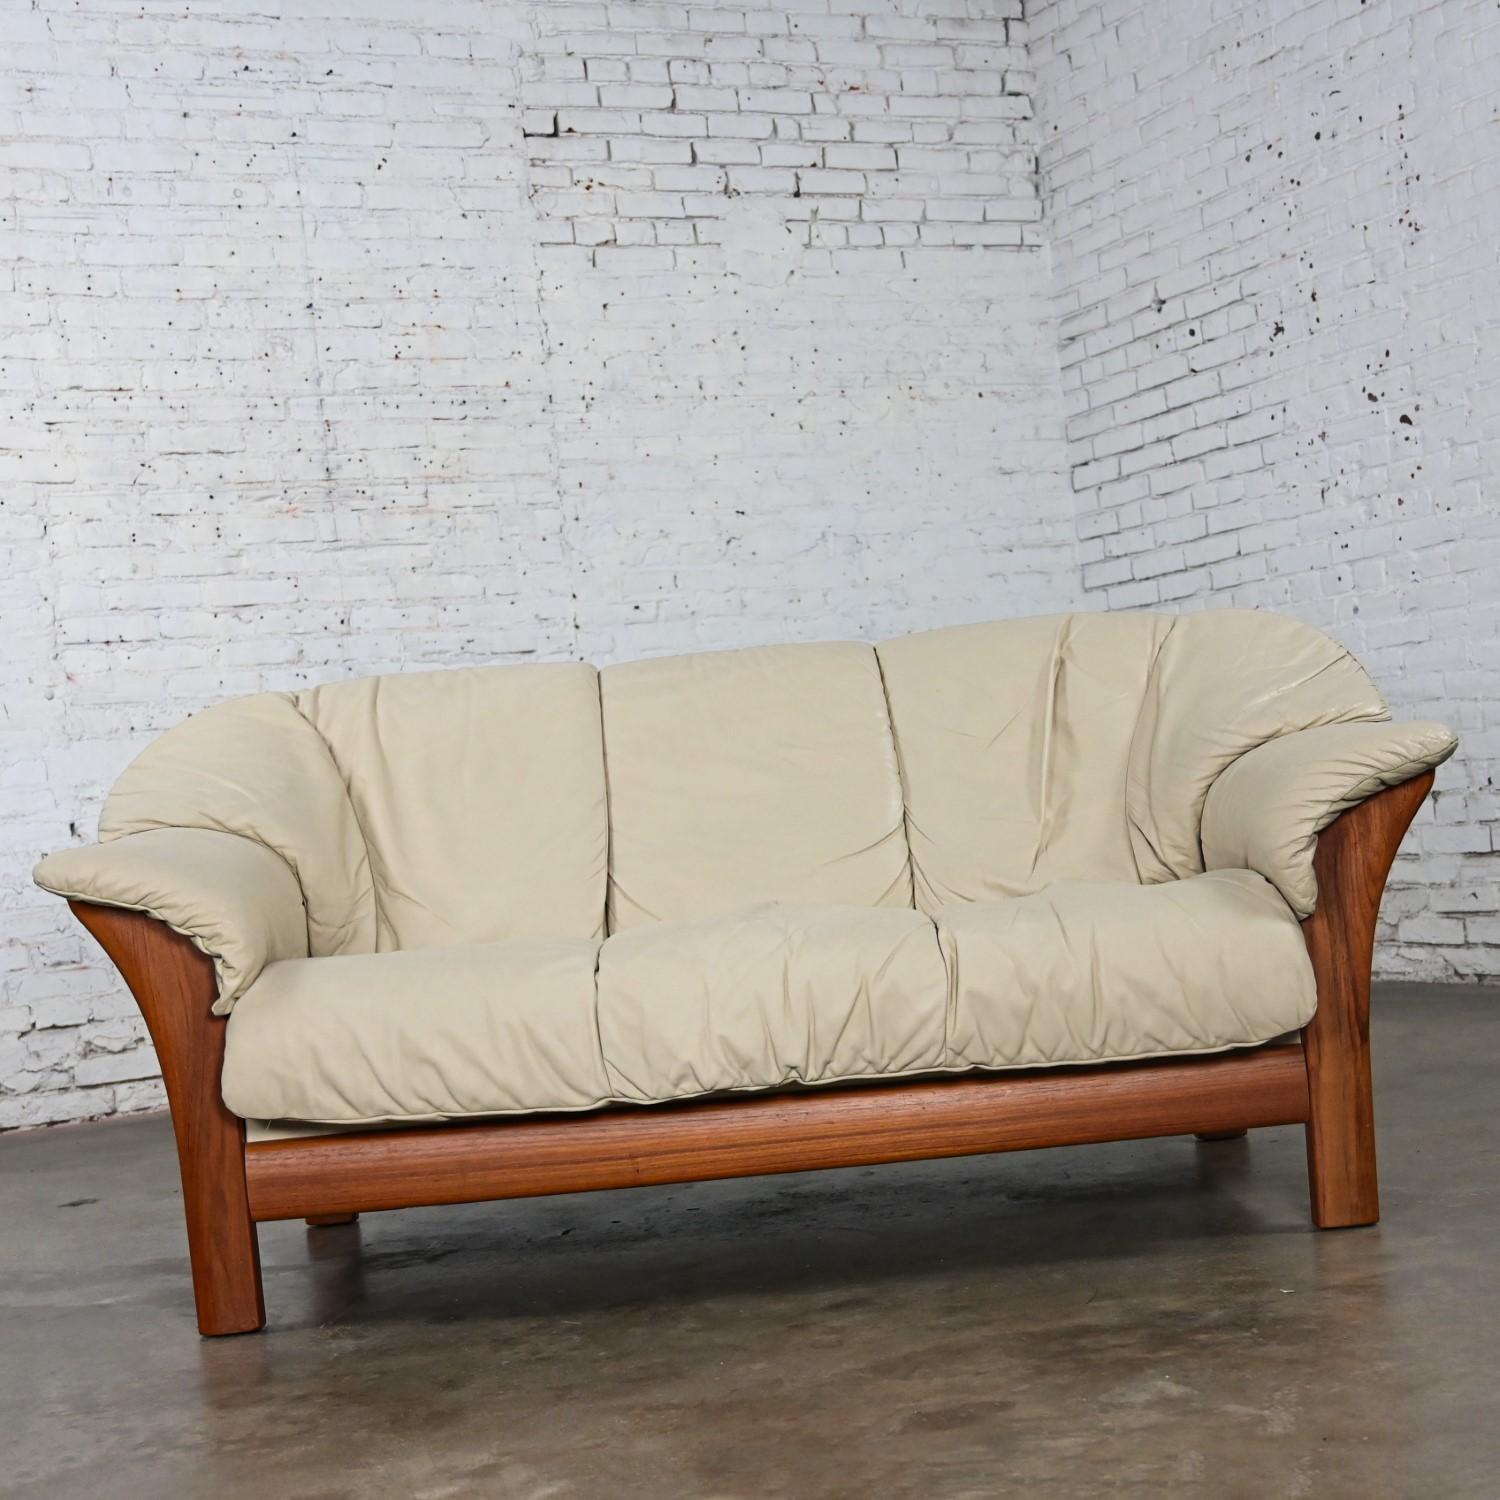 Scandinavian Modern Teak & Off White Leather Small Sofa Attributed to Ekornes For Sale 13